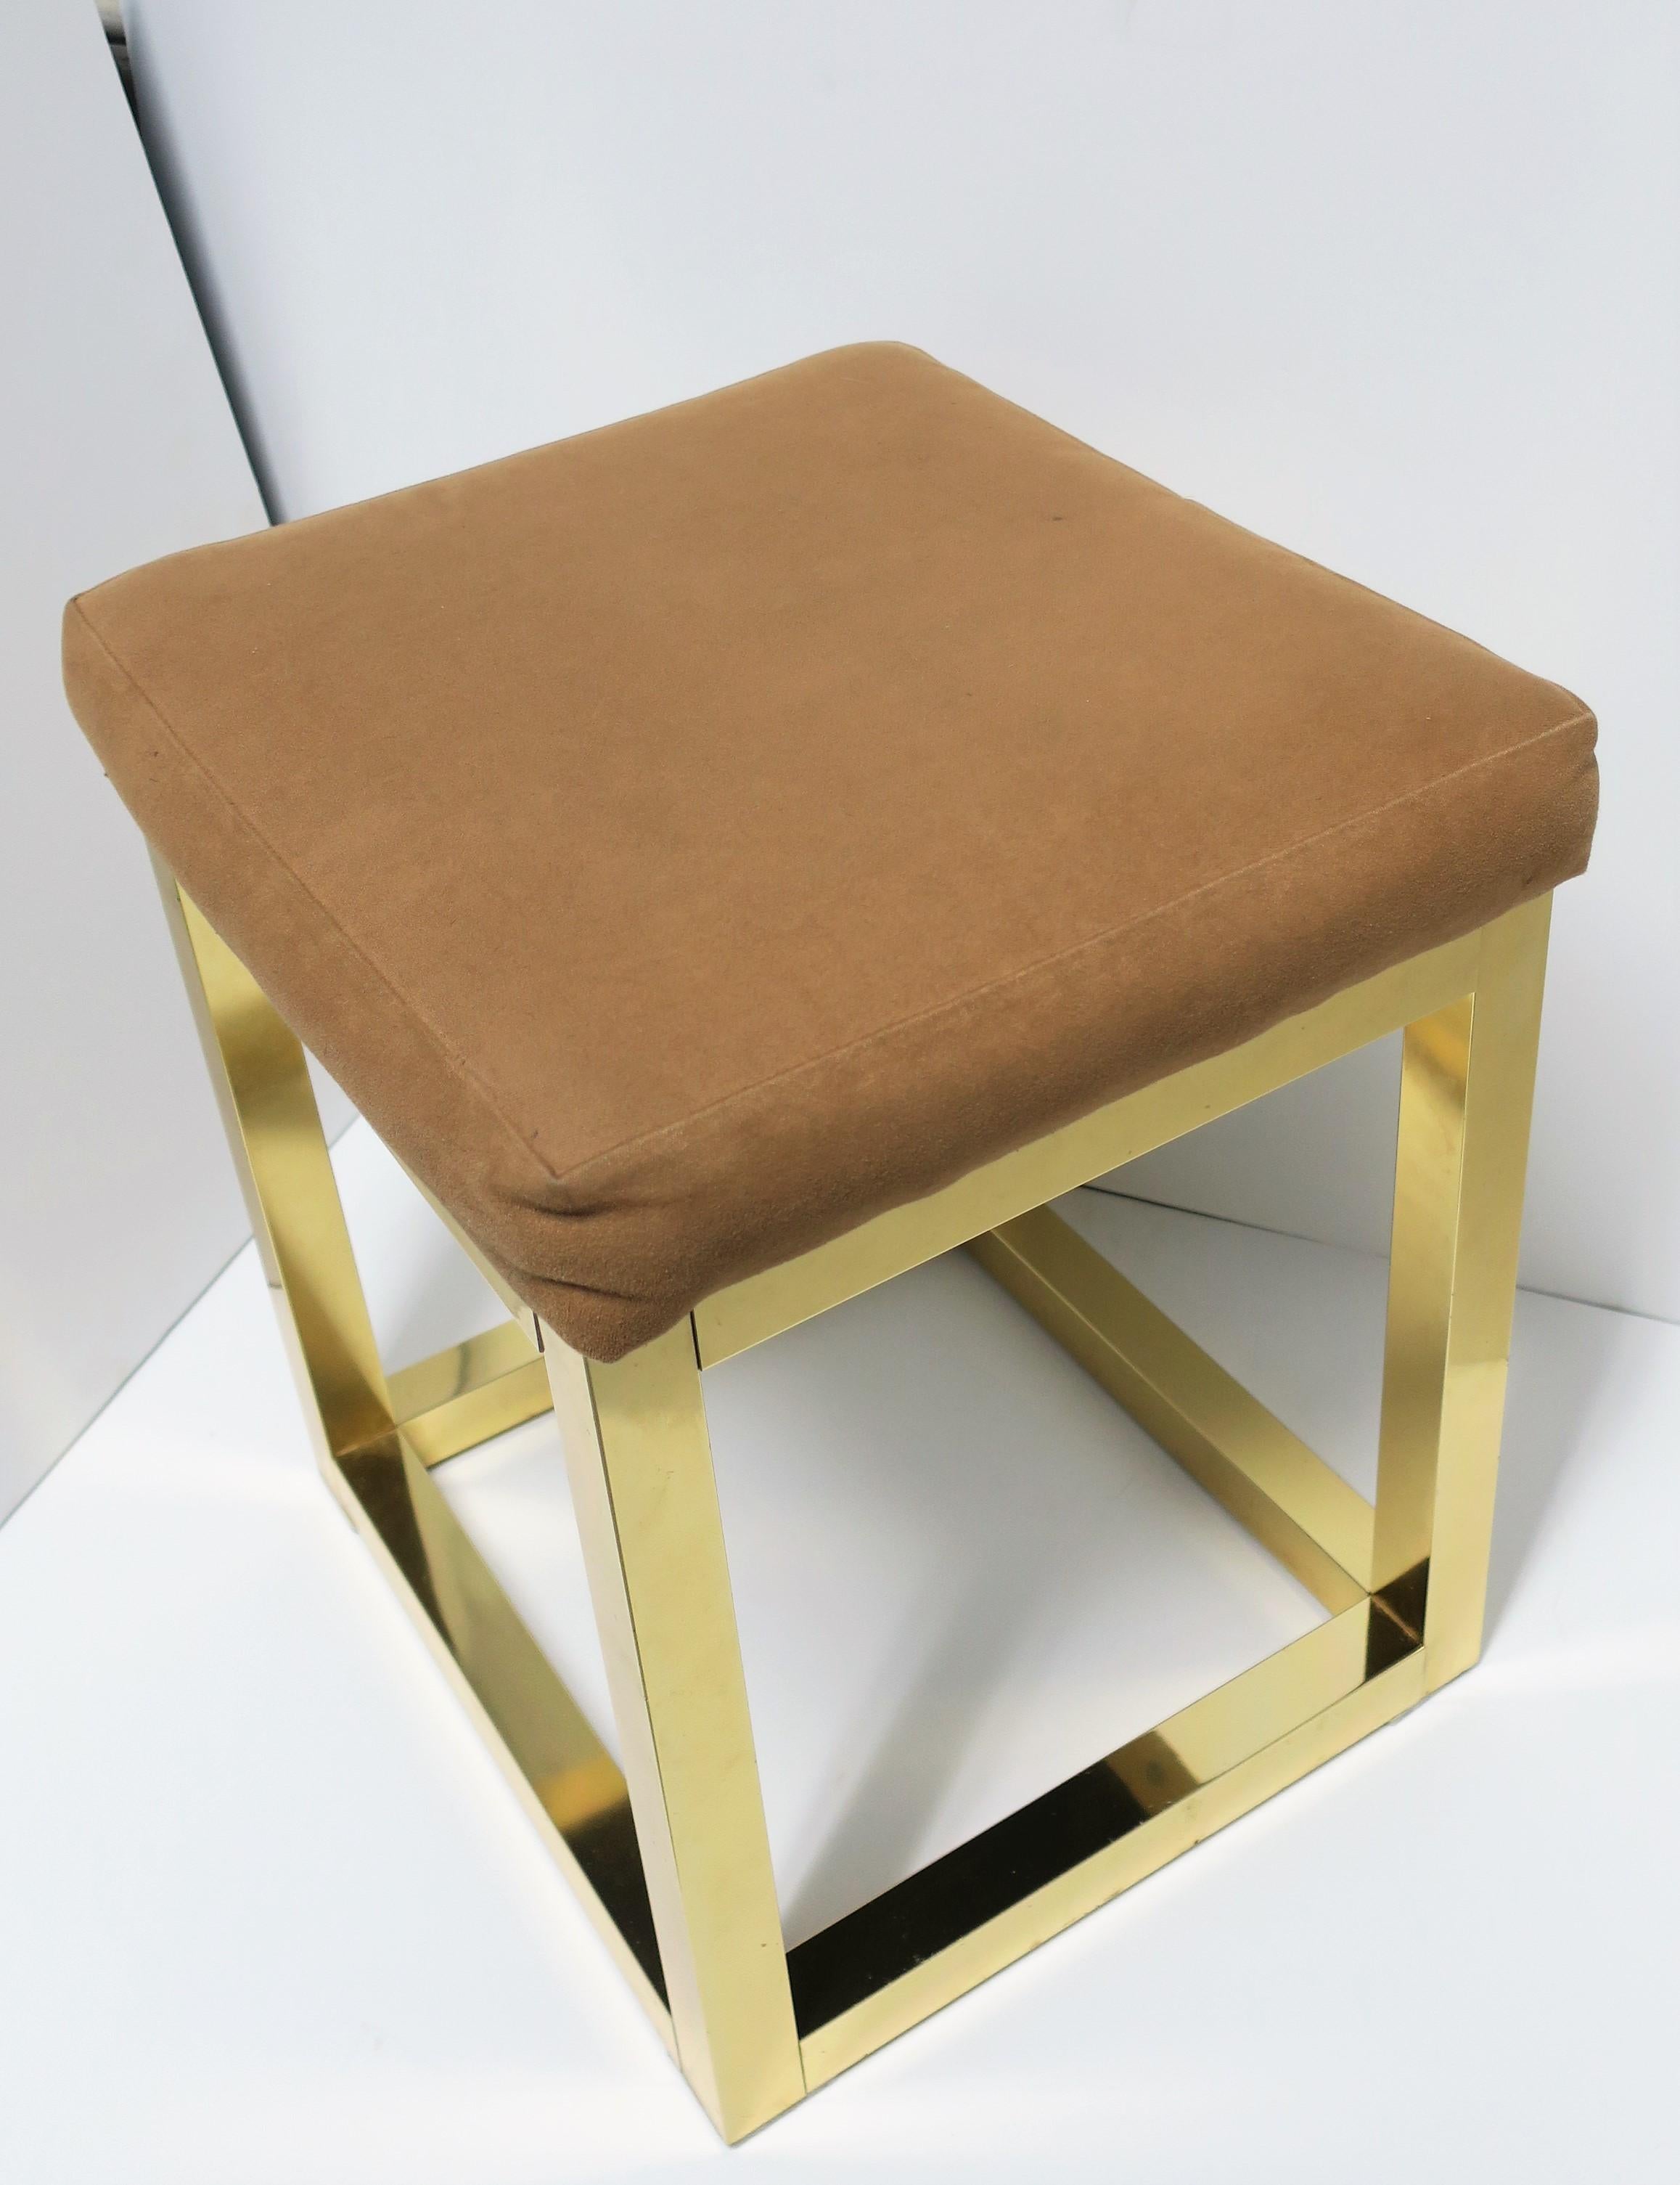 A 1970s modern brass bench or stool with upholstered seat cushion in the style of designer Paul Evans, circa 1970s.

Measurements: 13.75